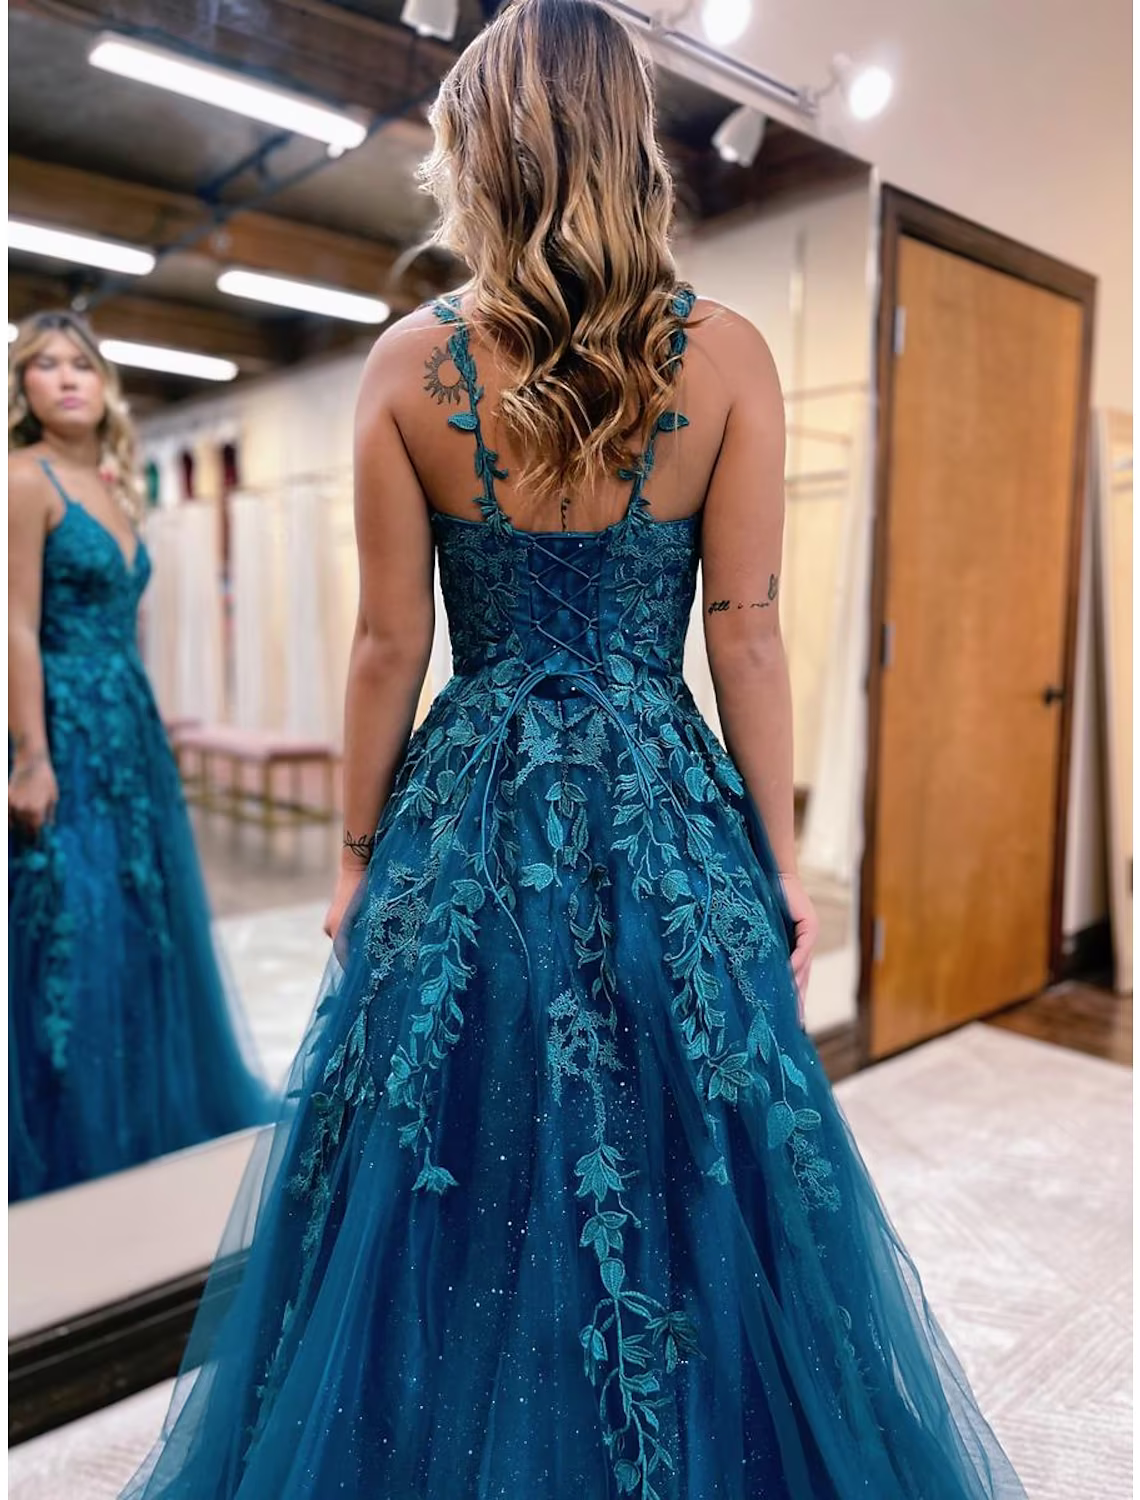 Ball Gown A-Line Prom Dresses Sparkle Shine Dress Formal Floor Length Sleeveless V Neck Tulle Backless with Glitter Appliques